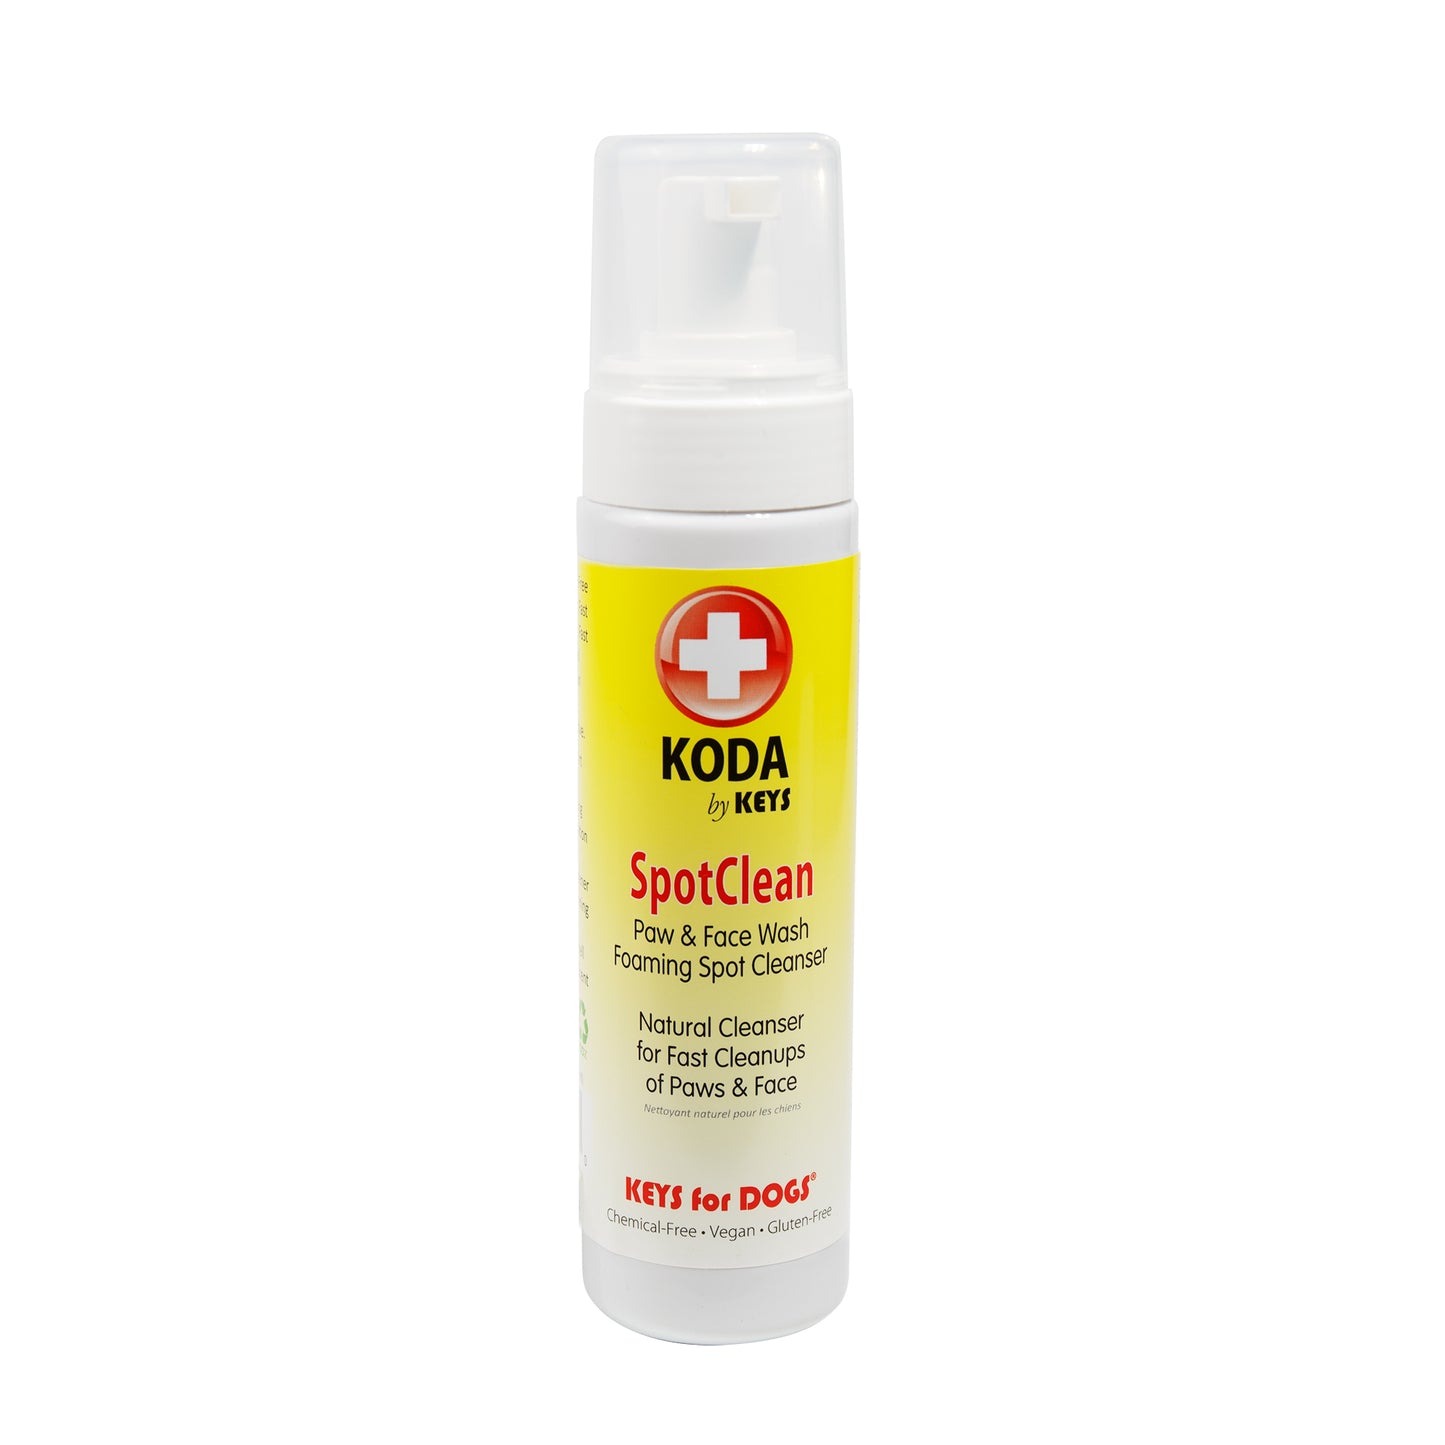 Primary image of Koda Spot Cleanse Paws + Face Cleanse for Dogs